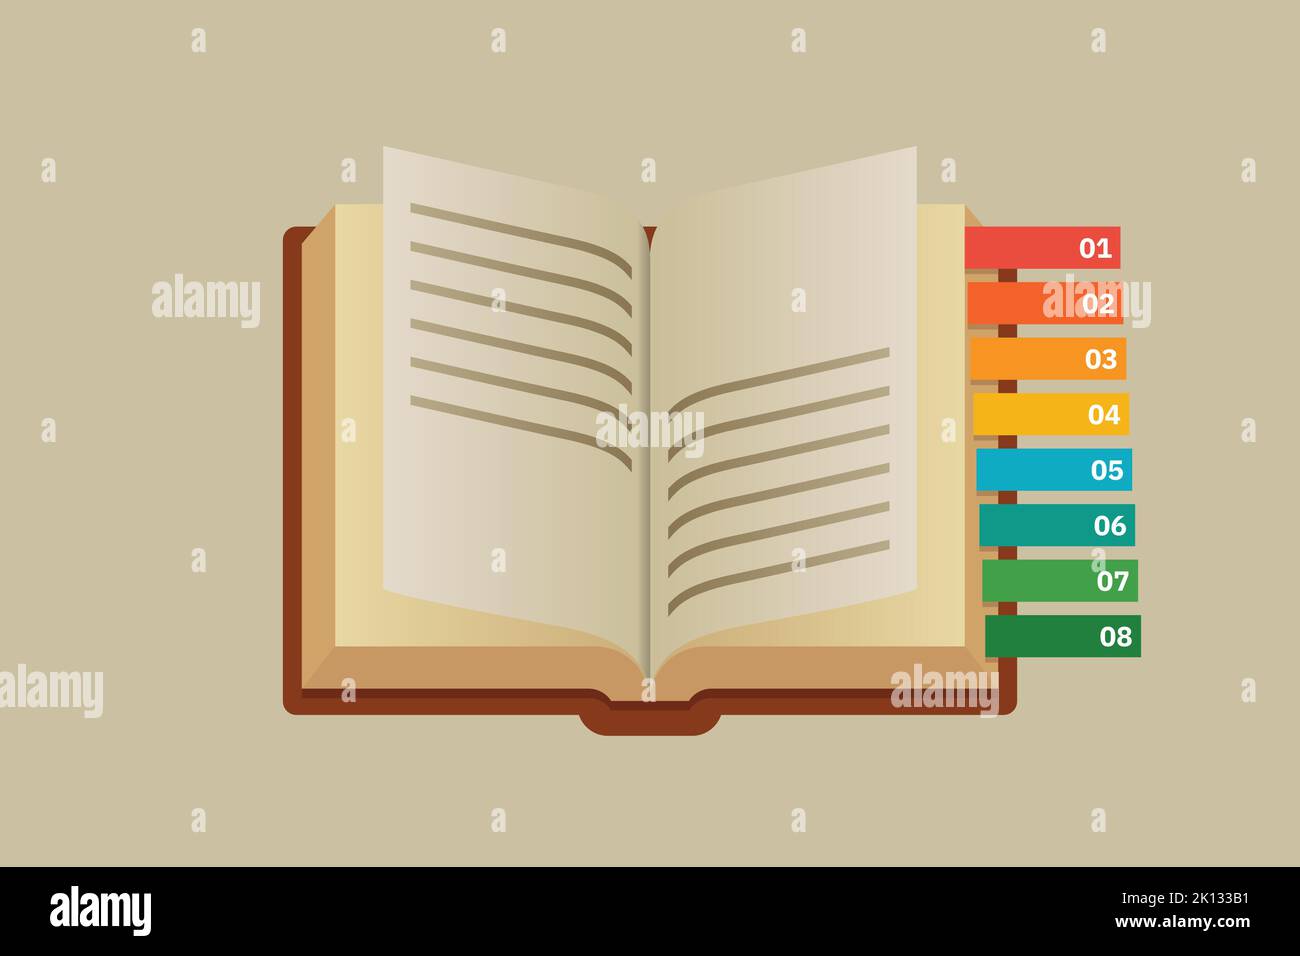 Open book education infographic. Vector illustration Stock Vector